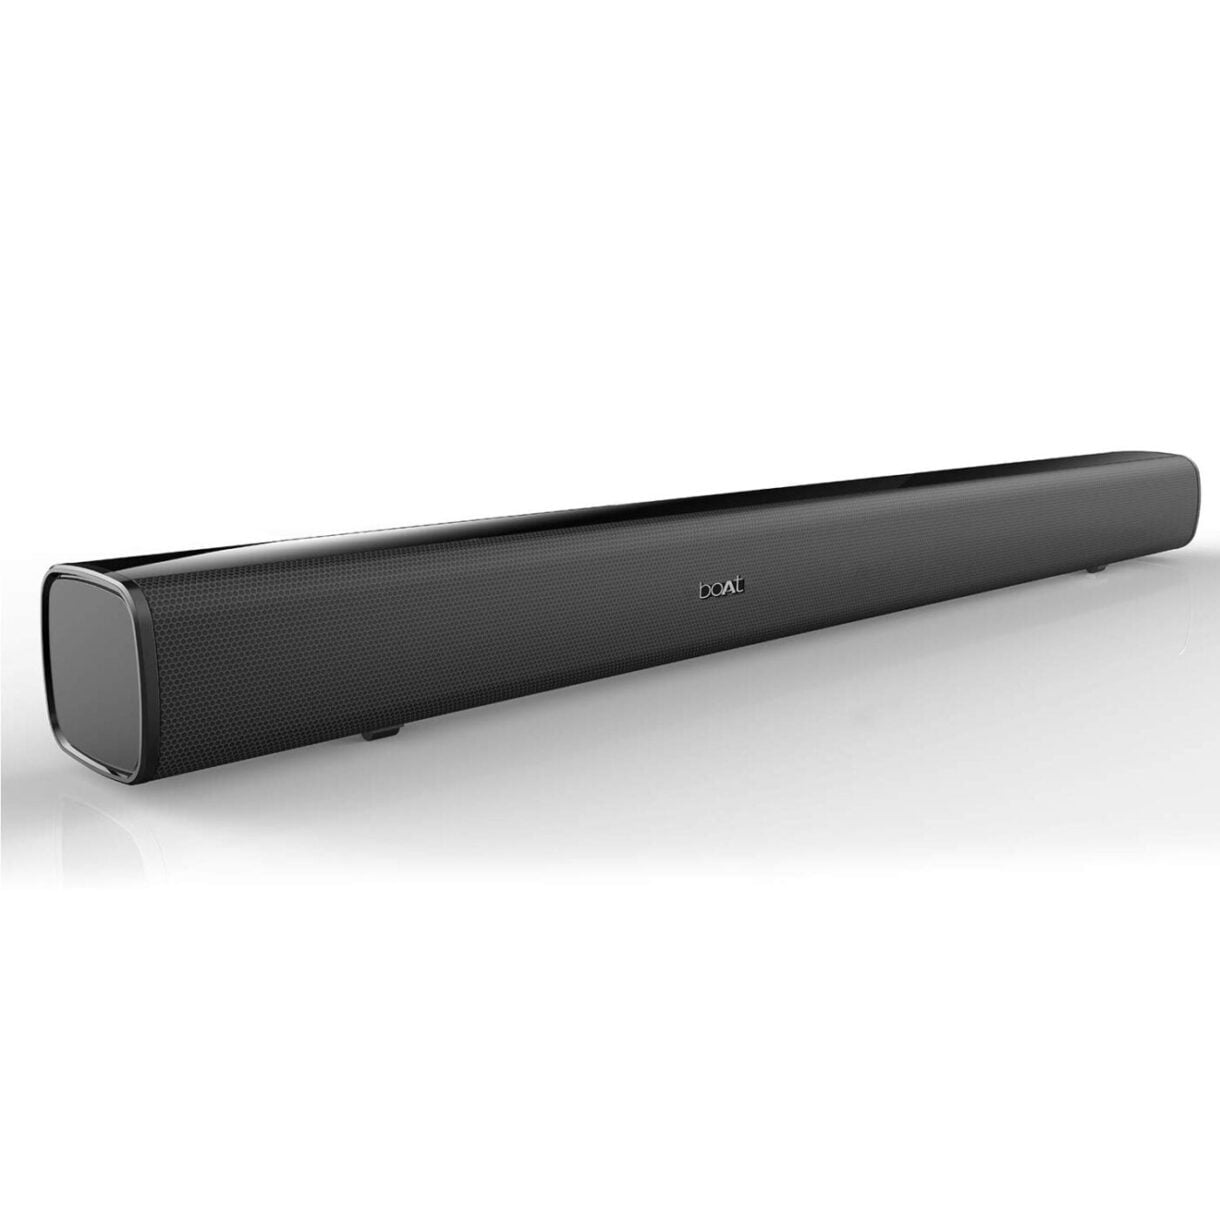 boAt AAVANTE BAR 1160 60W Bluetooth Soundbar with 2.0 Channel boAt Signature Sound, Multiple Compatibility Modes, Sleek Design and Entertainment EQ Modes